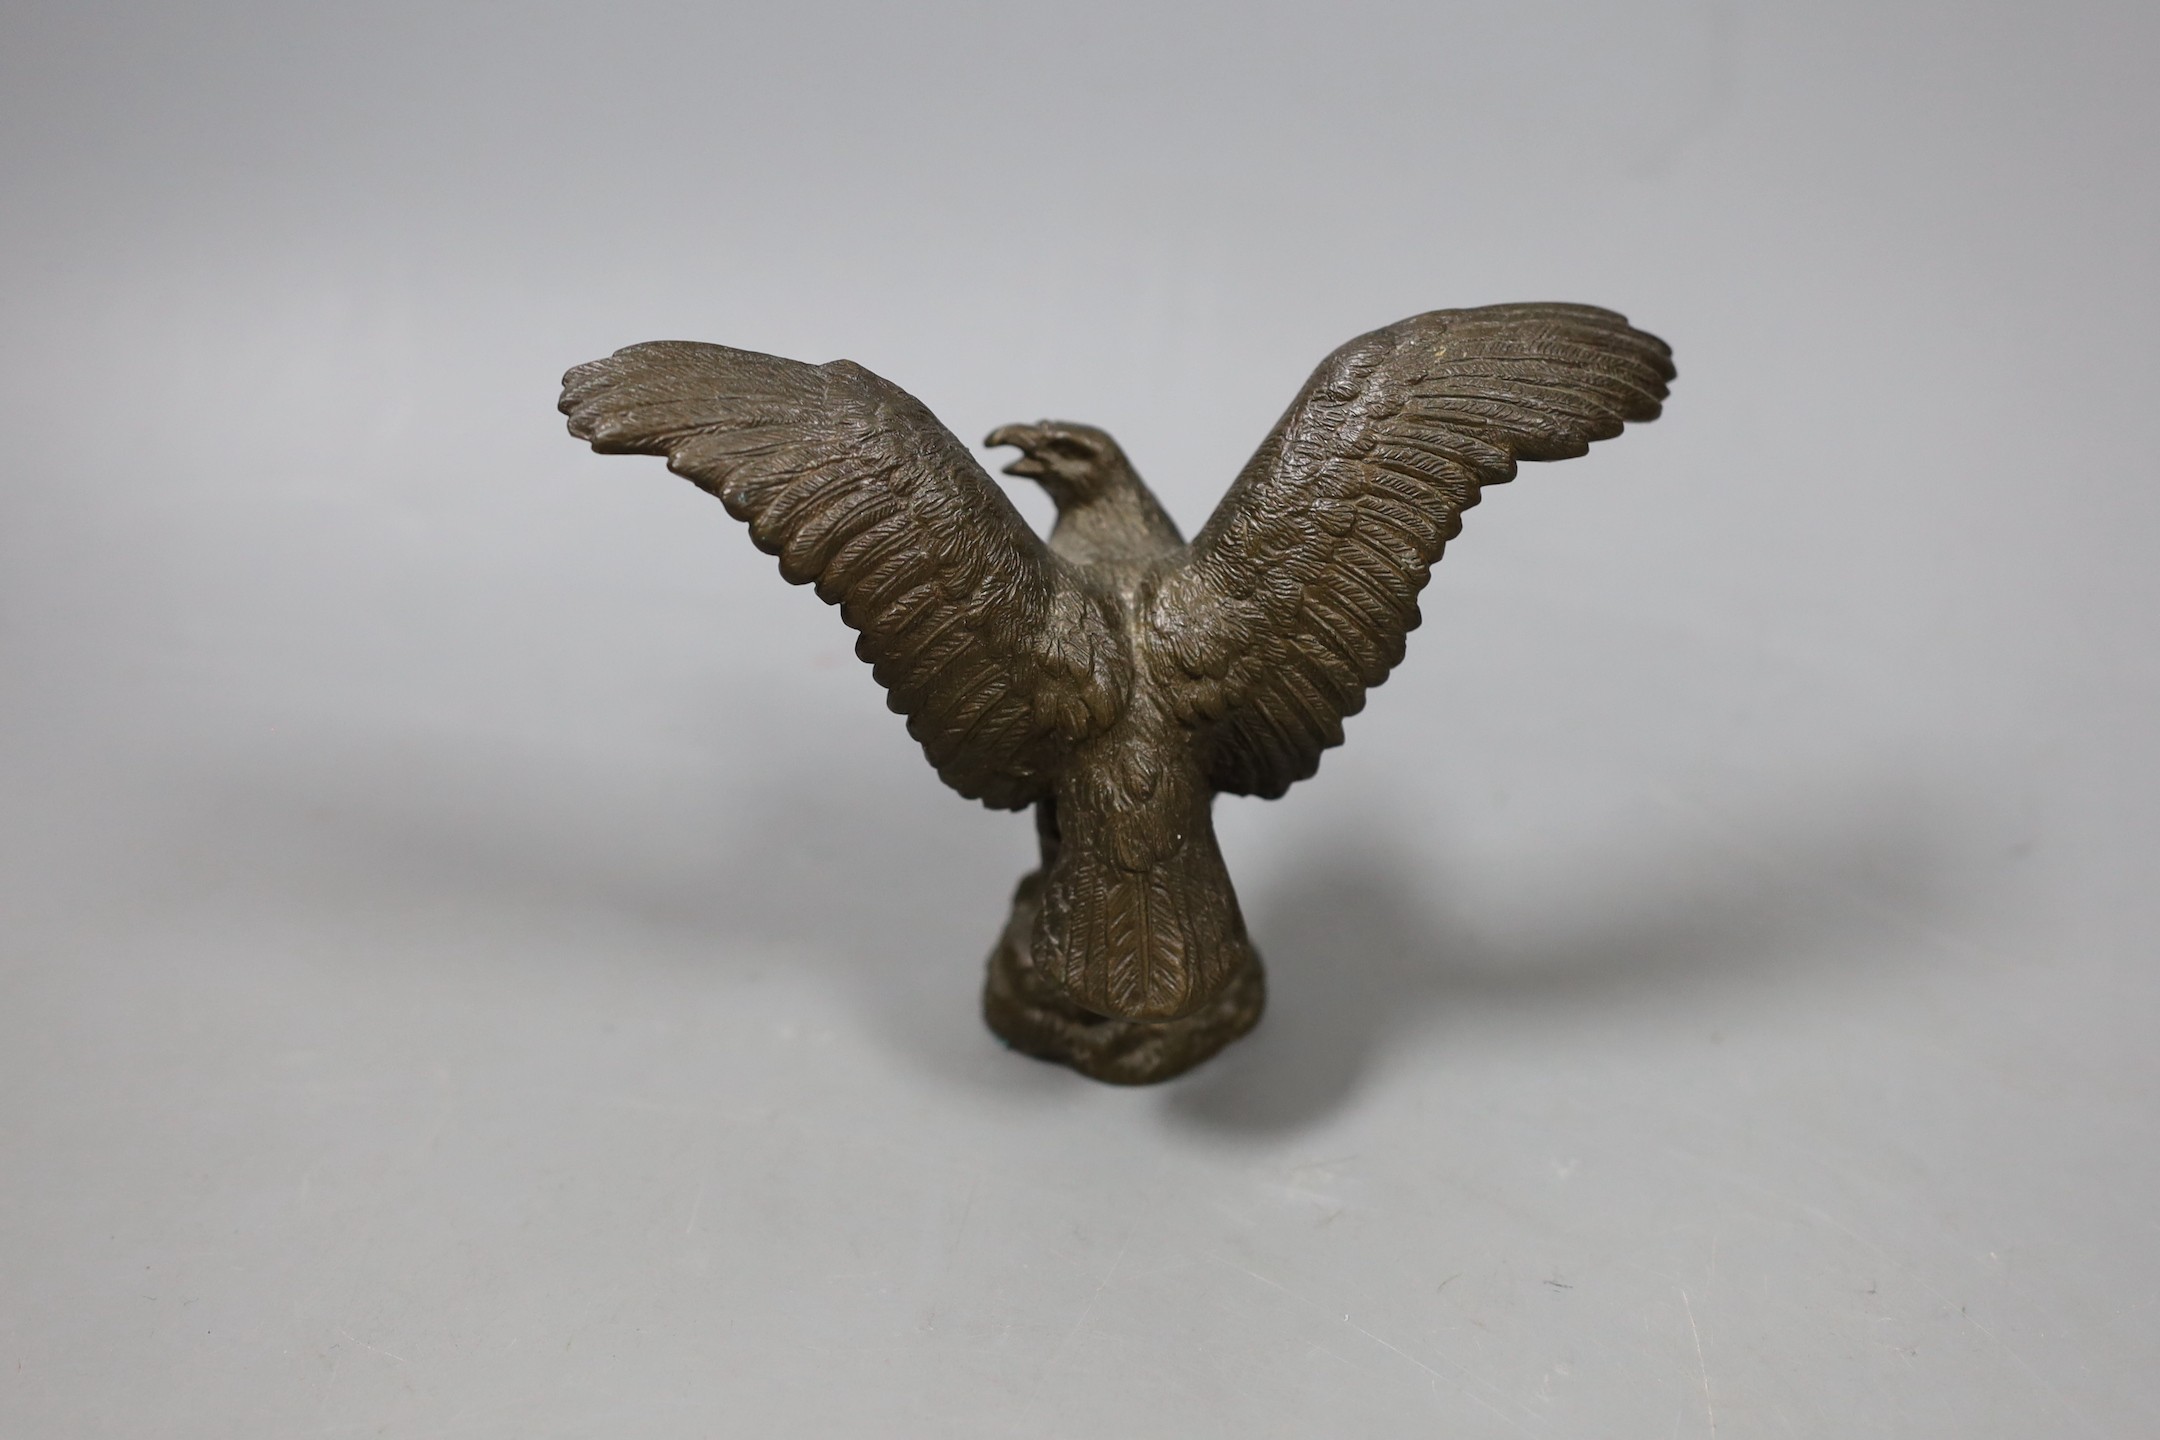 A bronze figure of an eagle with wings spread, 10cm high